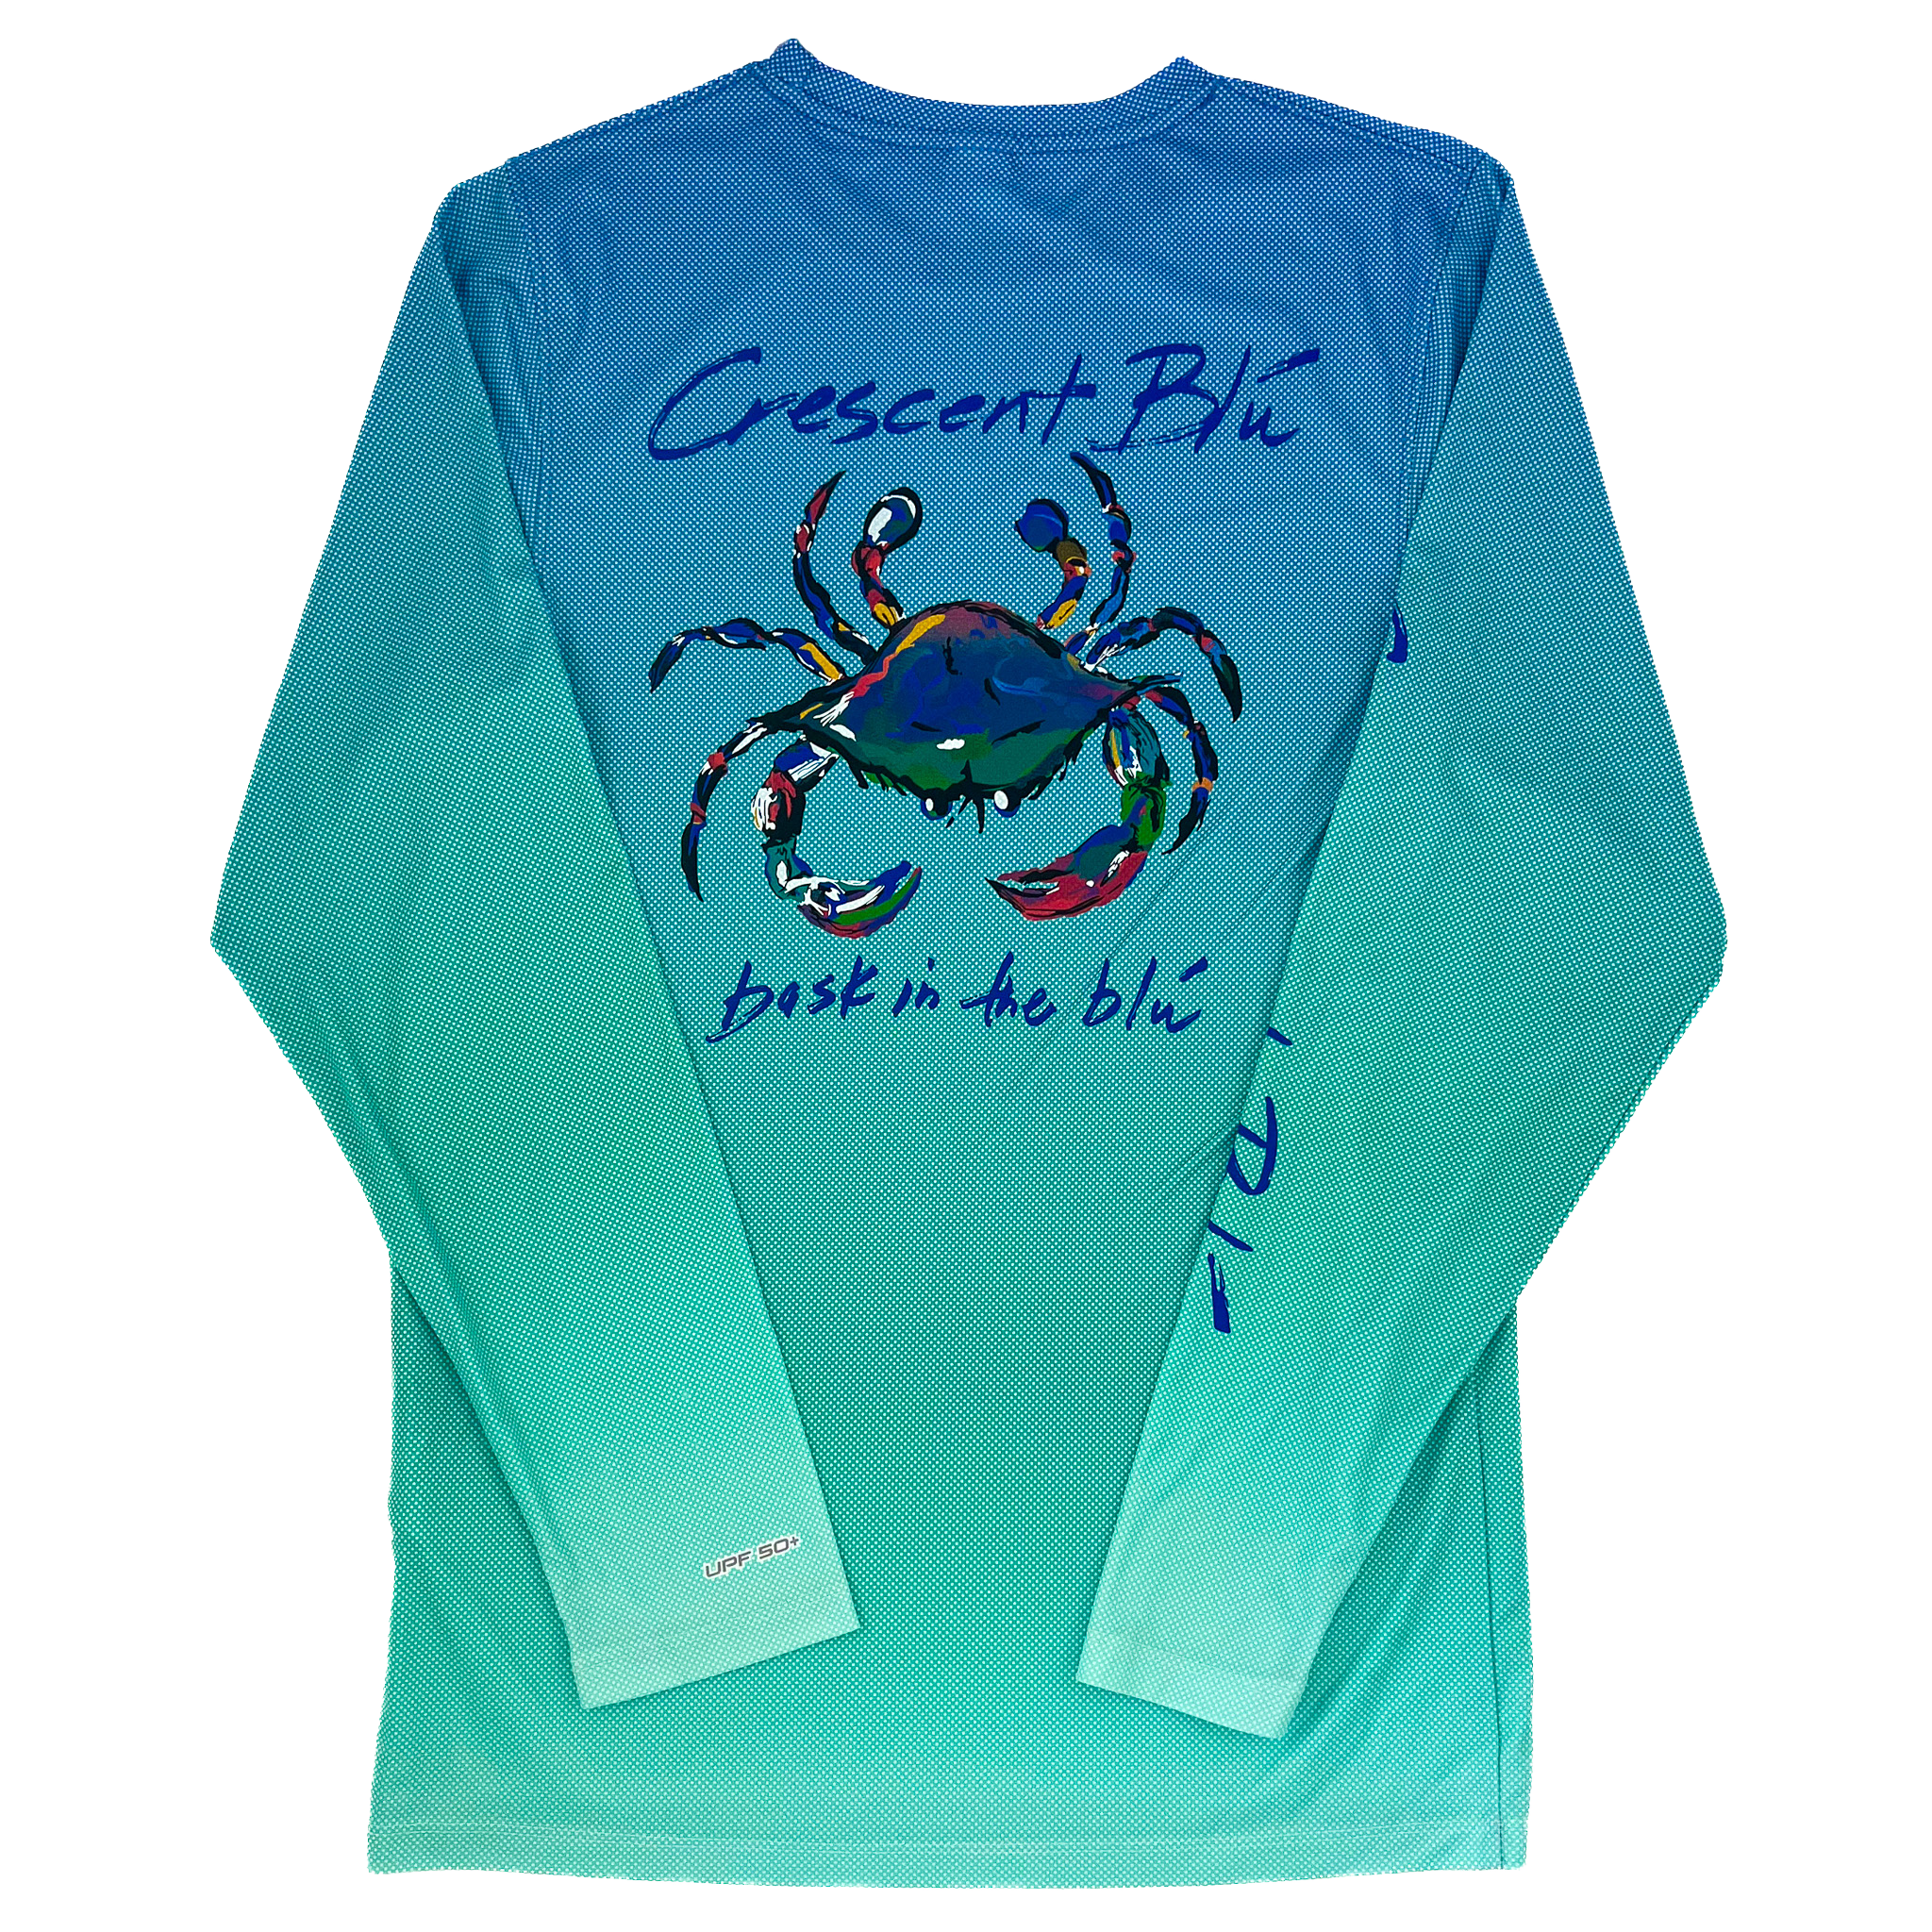 A blue crab is on the back of a long sleeve shirt.  The backround of the shirt is  gradient color from  blue at the top to teal at the bottom. "Crescent Blu" is written above the crab and "bask in the blu" is written below it. 